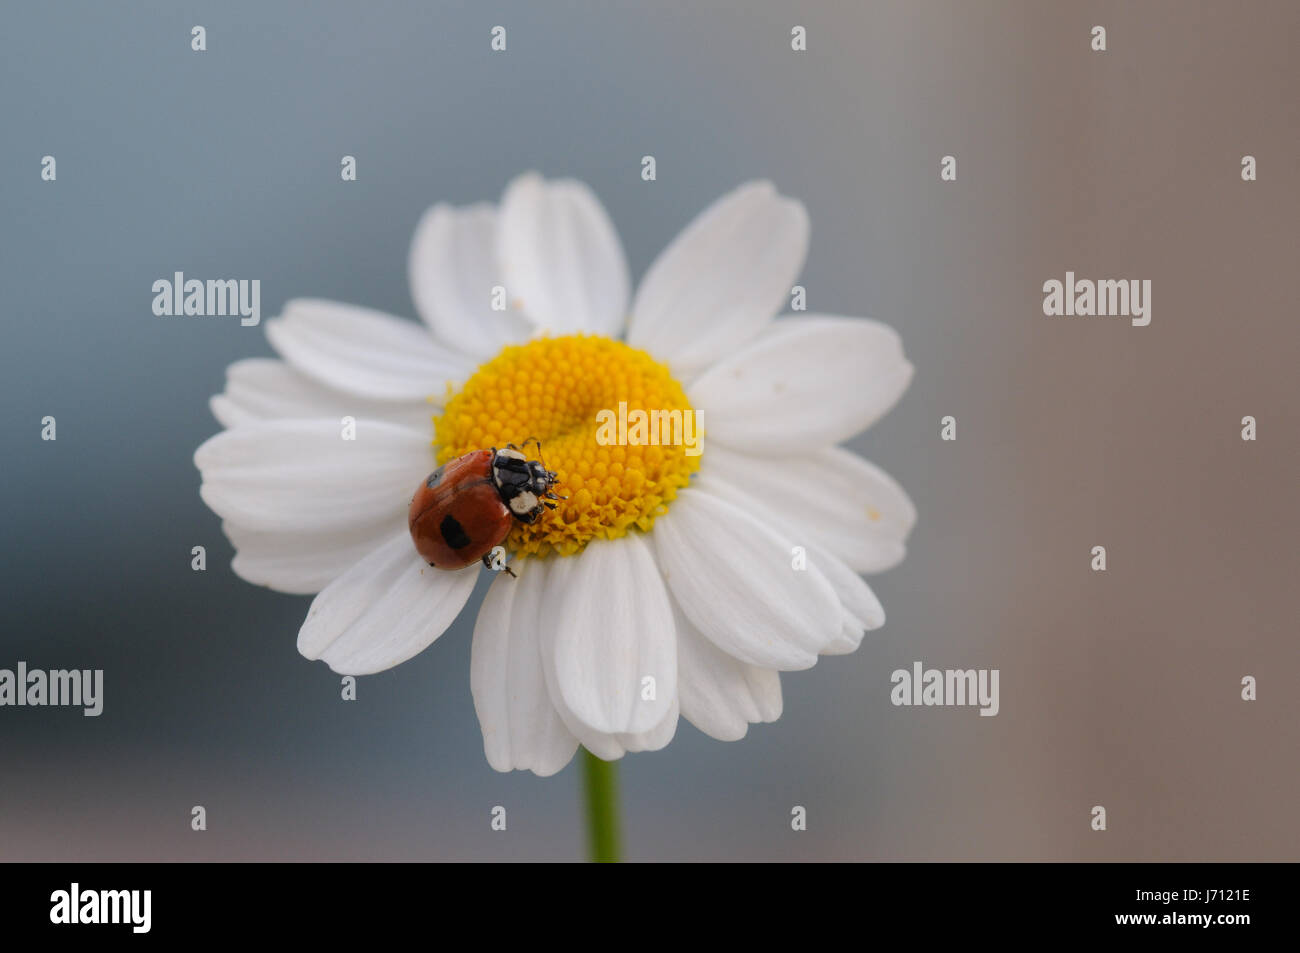 lady insect bird flower plant insects flowers birds daisy plants ladybird Stock Photo